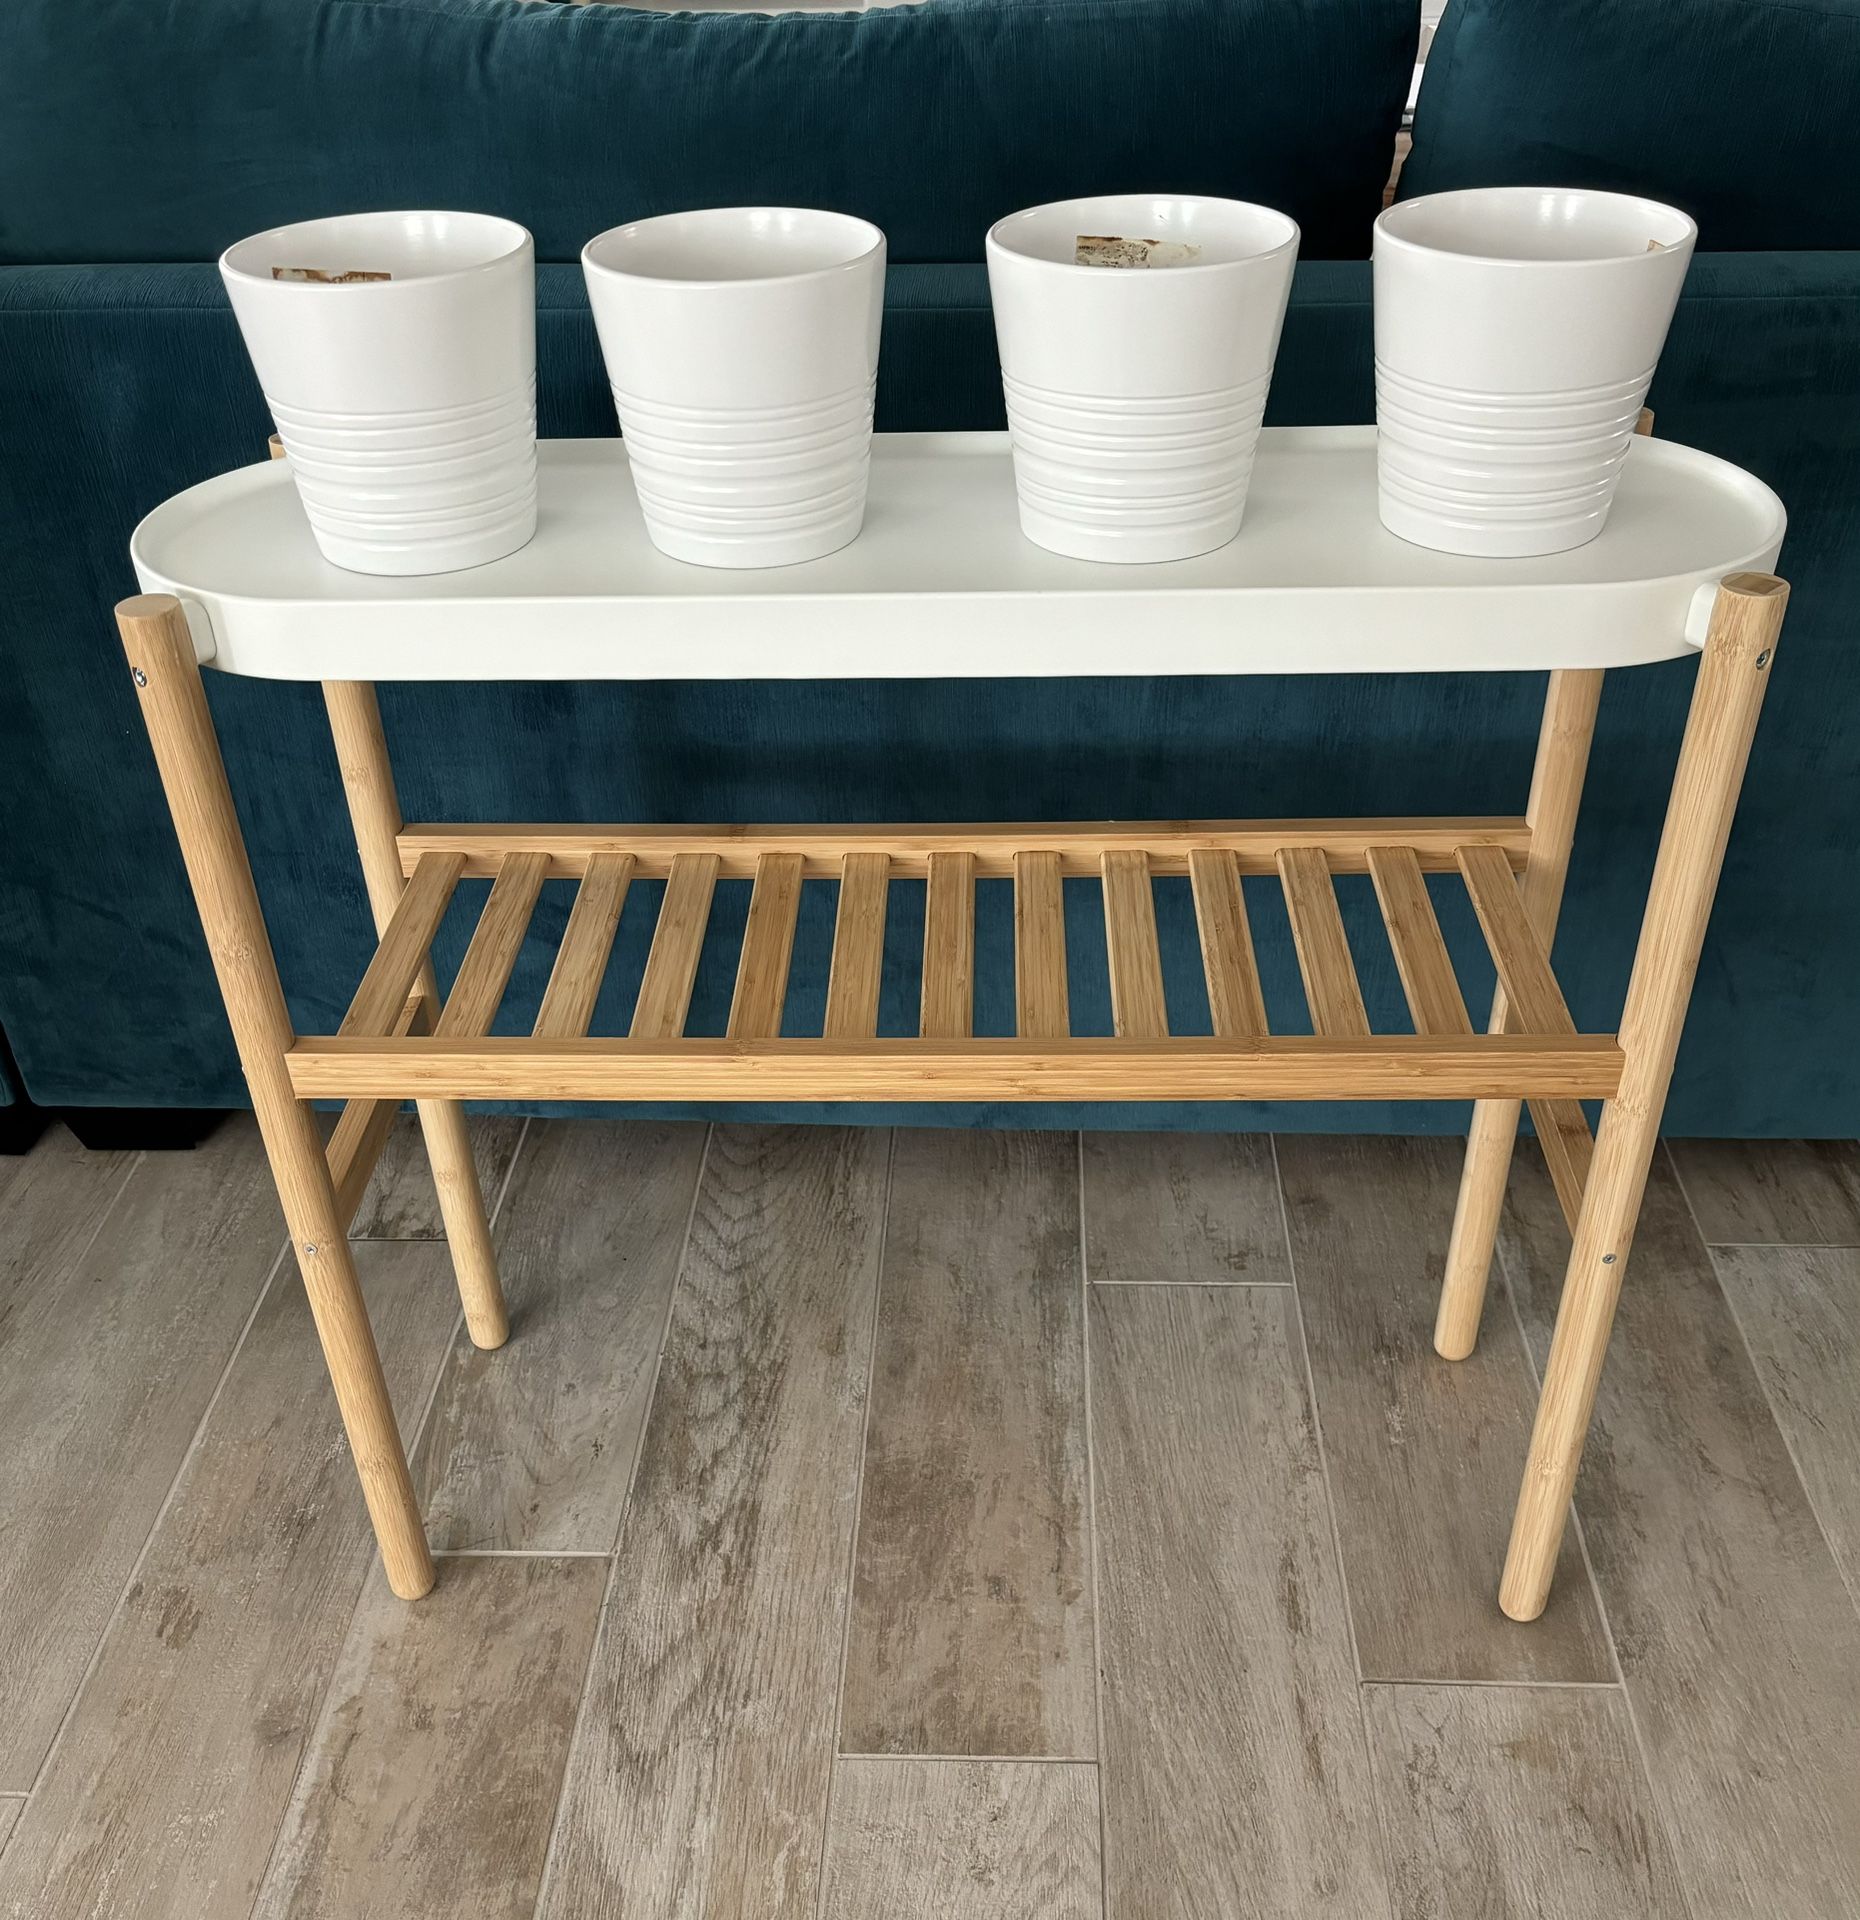 Ikea Satsumas Plant Stand (small pots included)